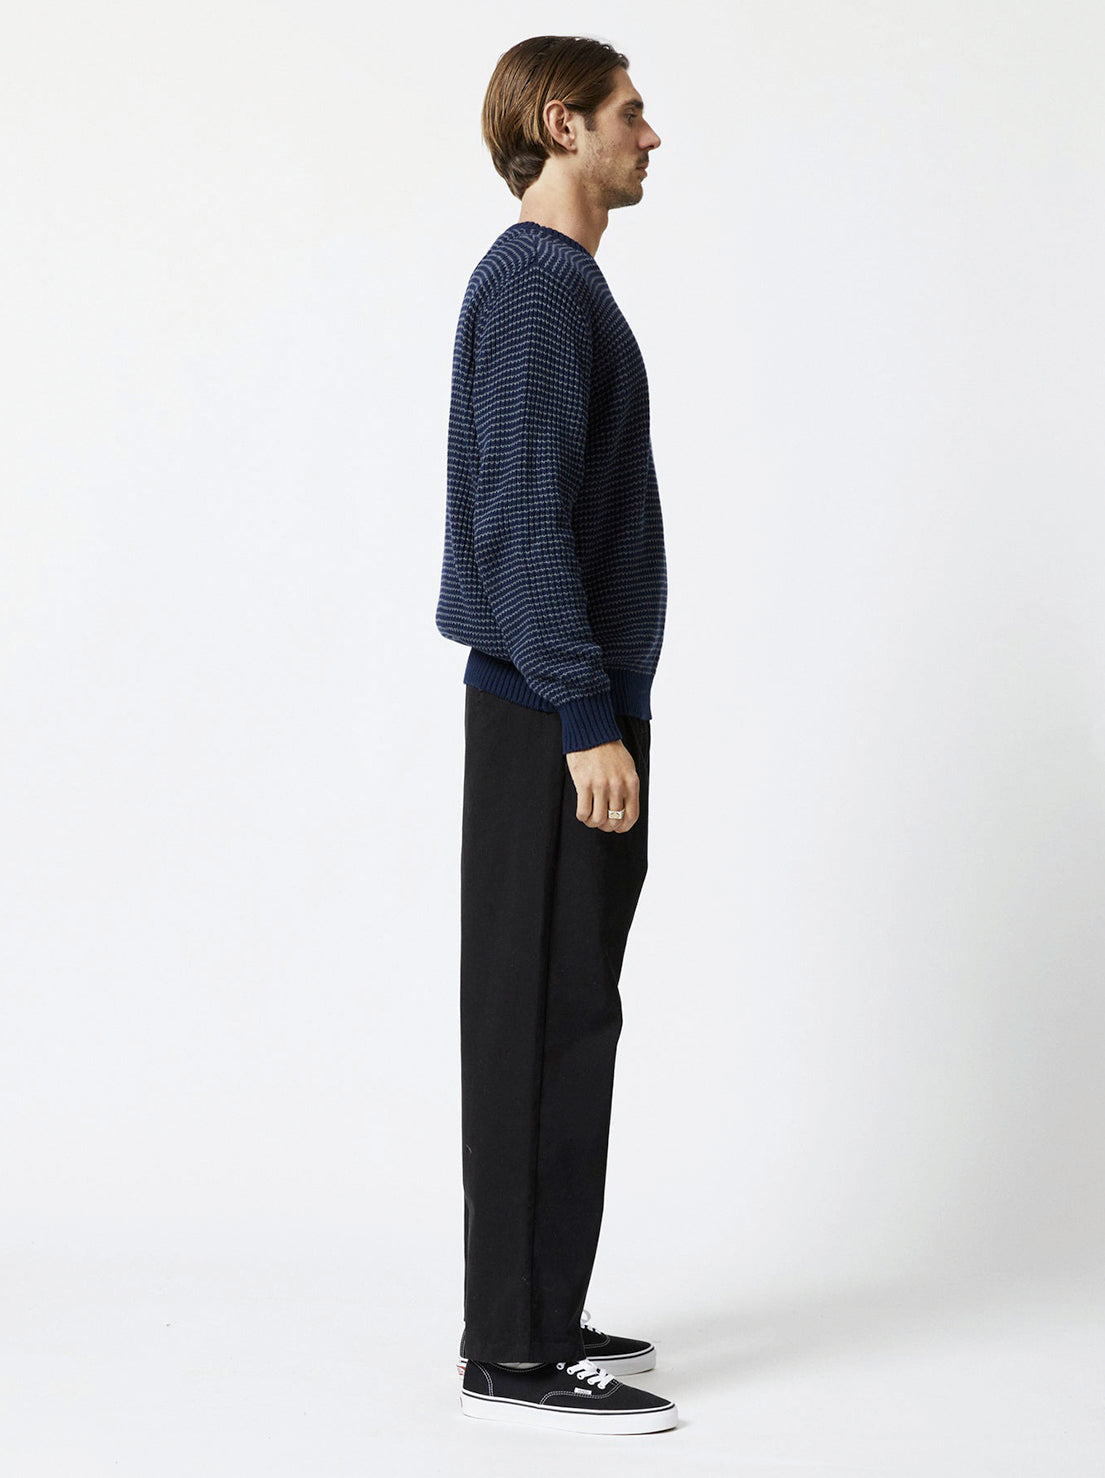 Mr Simple - Sailor Chunky Knit - Navy/Graphite